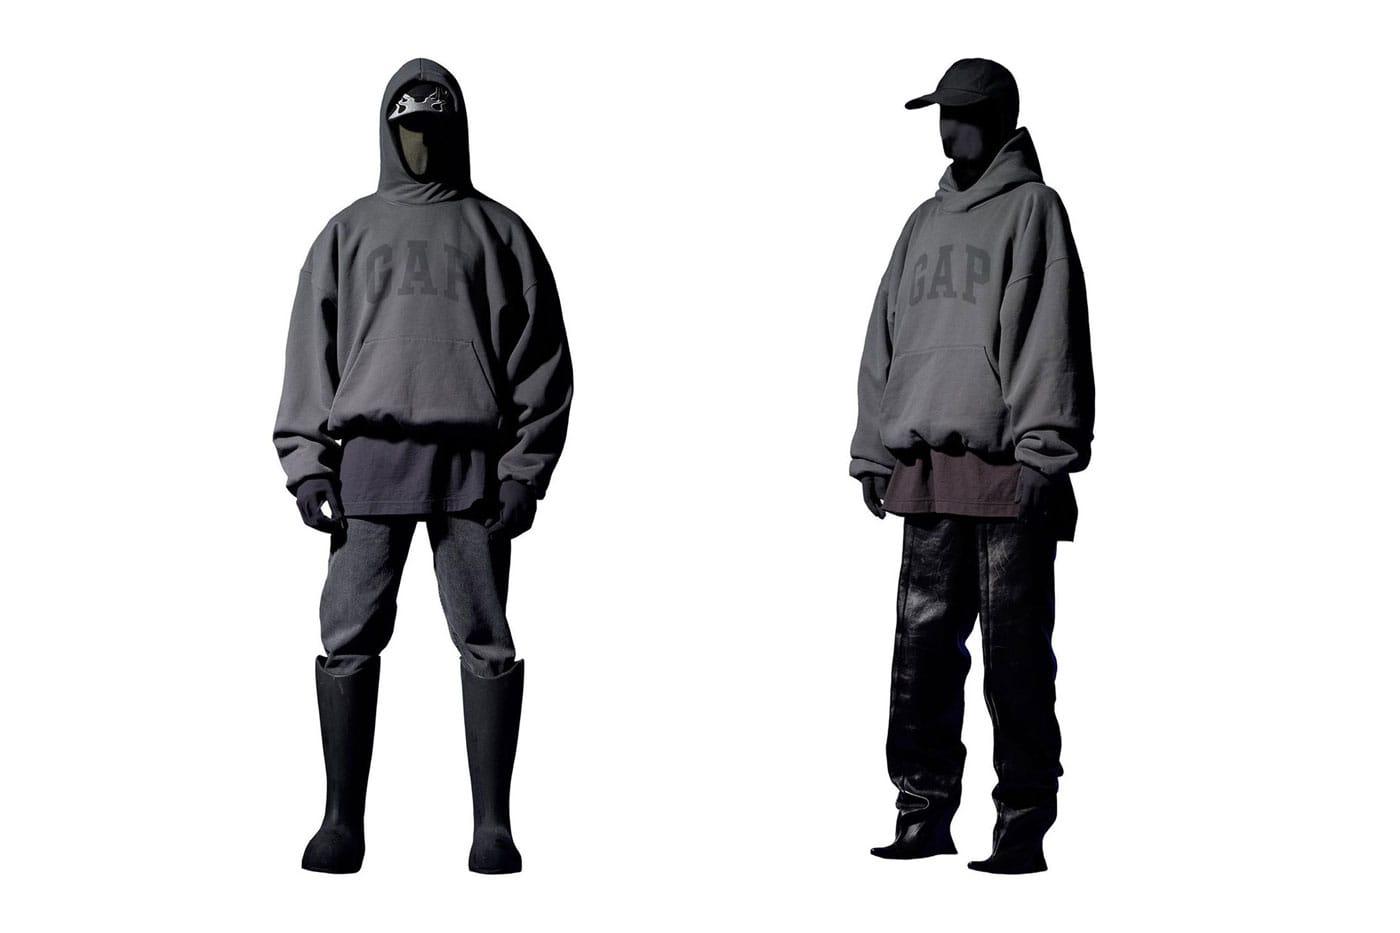 https://image-cdn.hypb.st/https%3A%2F%2Fjp.hypebeast.com%2Ffiles%2F2022%2F05%2Fyeezy-gap-engineered-by-balenciaga-collection-2-full-look-release-info-000.jpg?fit=max&cbr=1&q=90&w=750&h=500